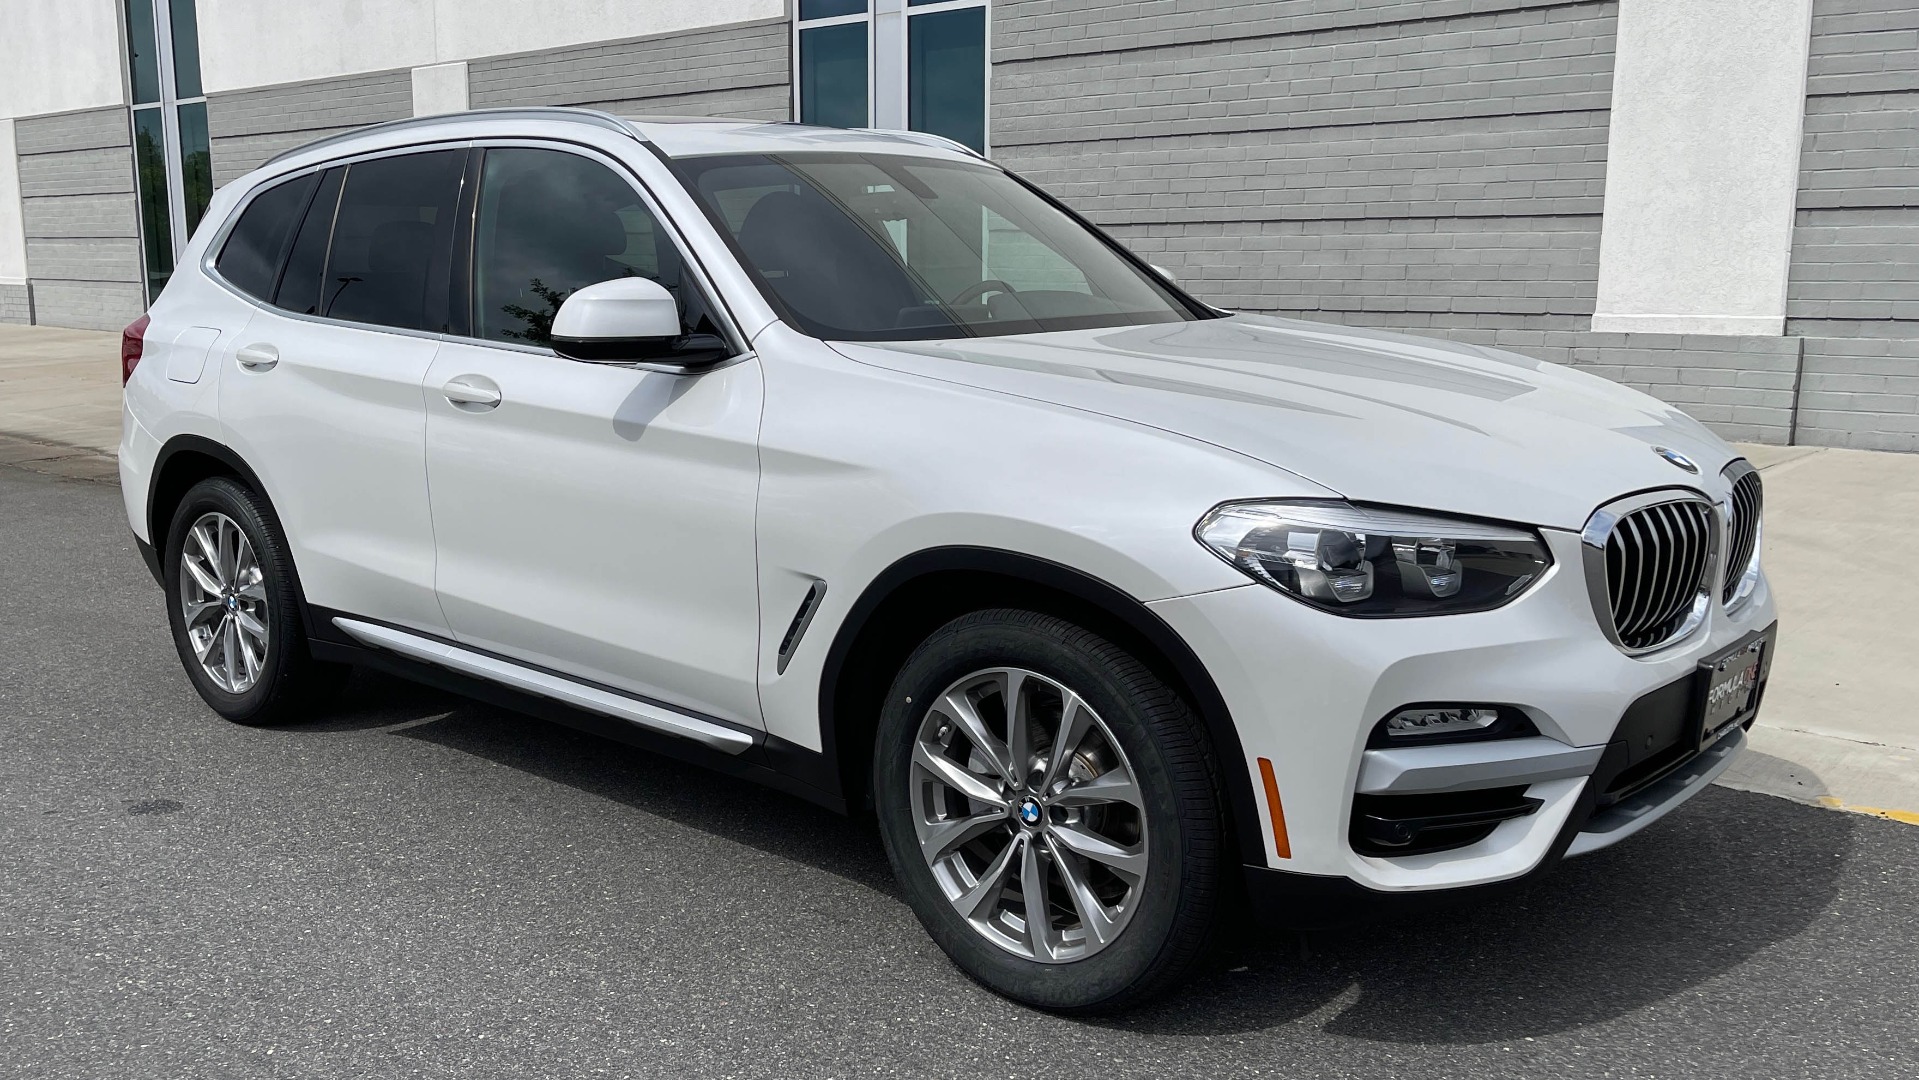 Used 2018 BMW X3 XDRIVE30I / NAV / PANO-ROOF / HTD STS / PARK DIST CNTRL / REARVIEW for sale Sold at Formula Imports in Charlotte NC 28227 5